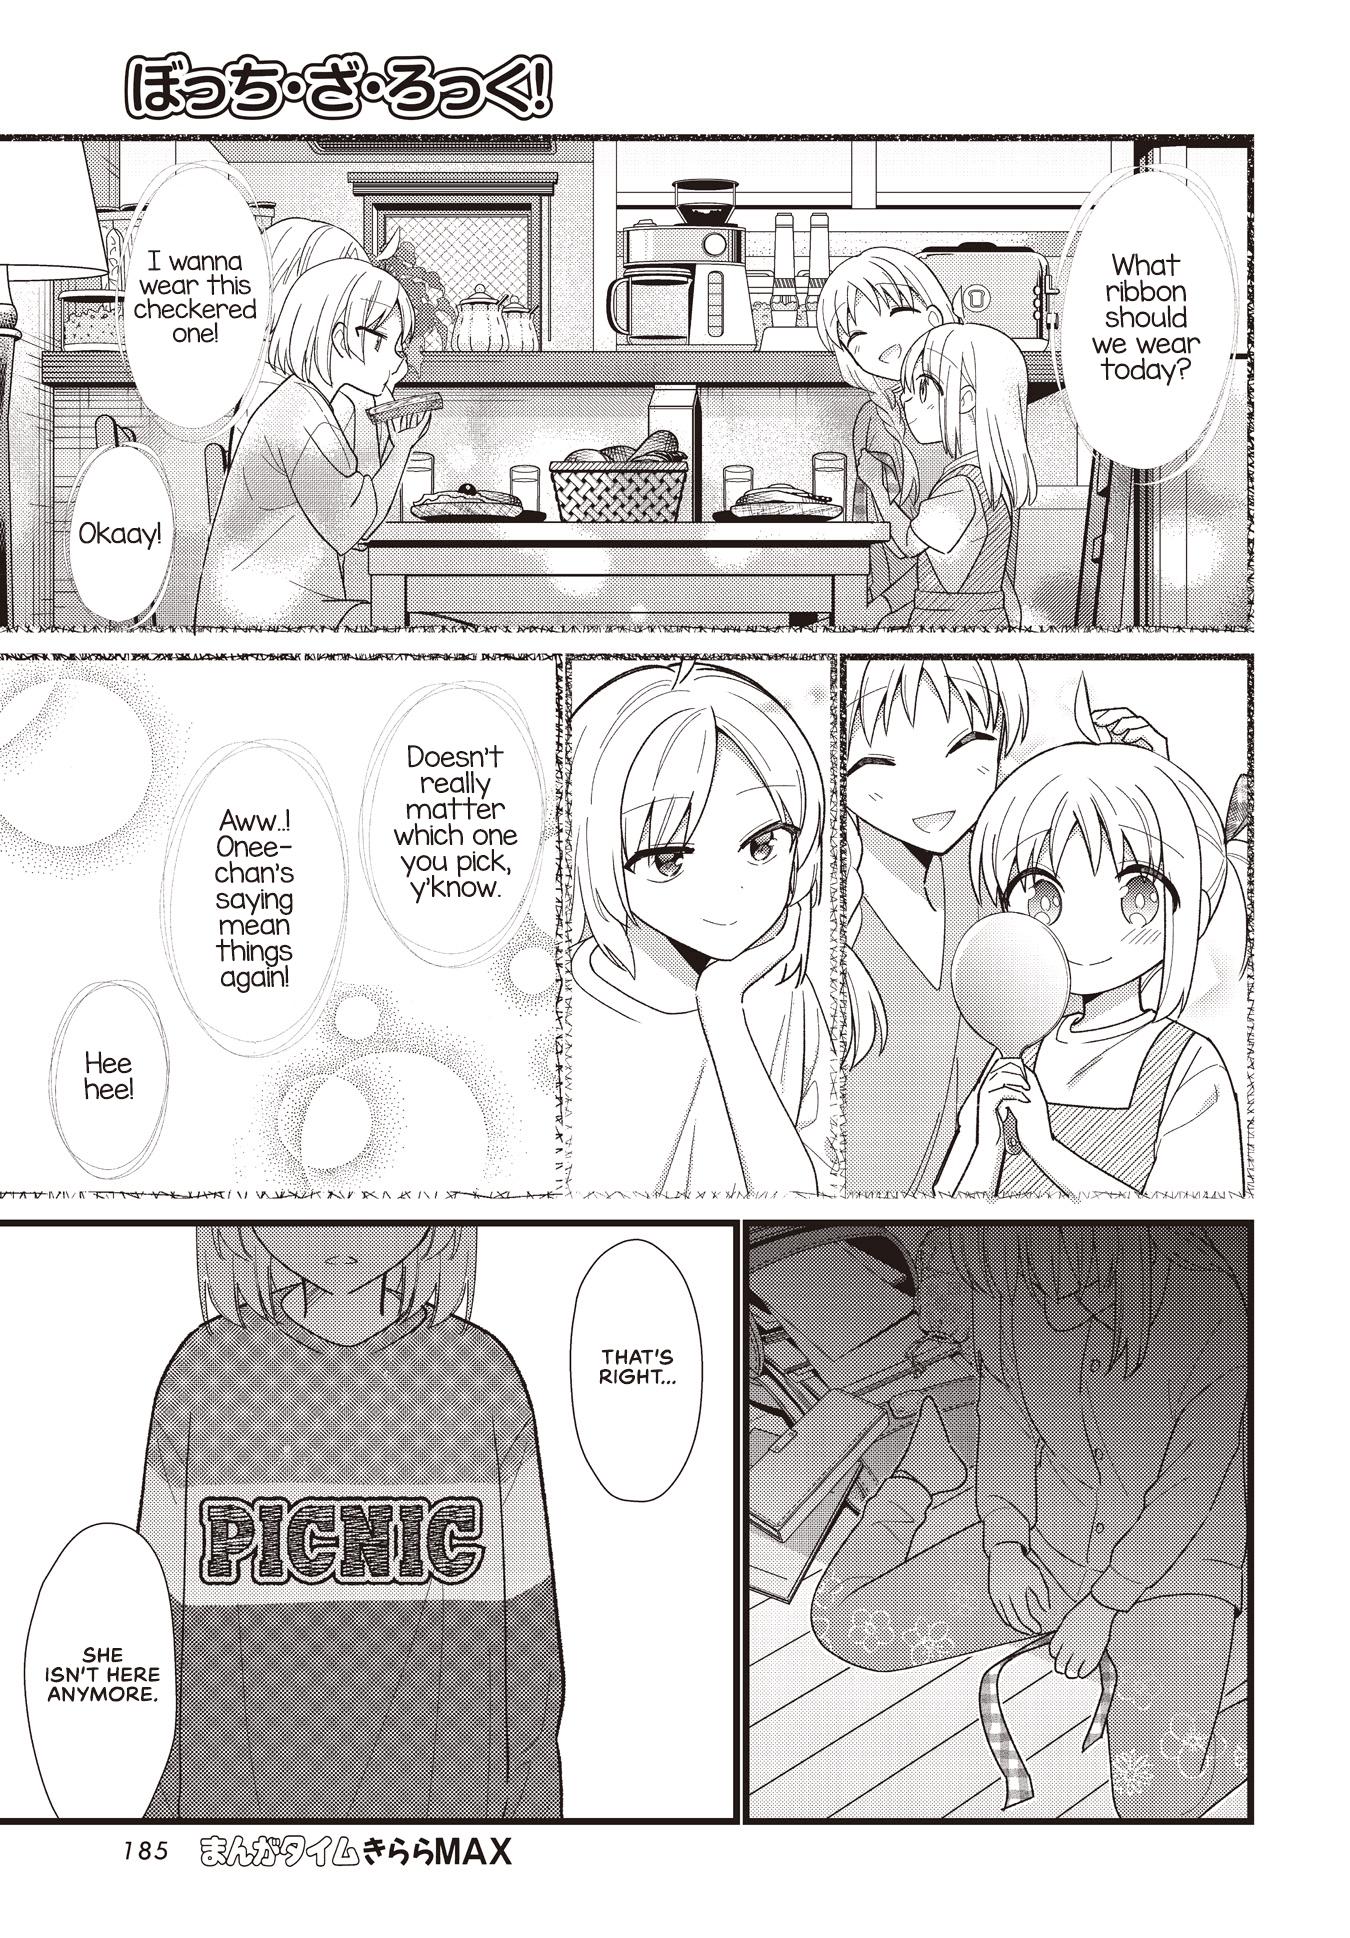 Bocchi The Rock Chapter 57.5: Offering Flowers Of Love To The Stars page 23 - 